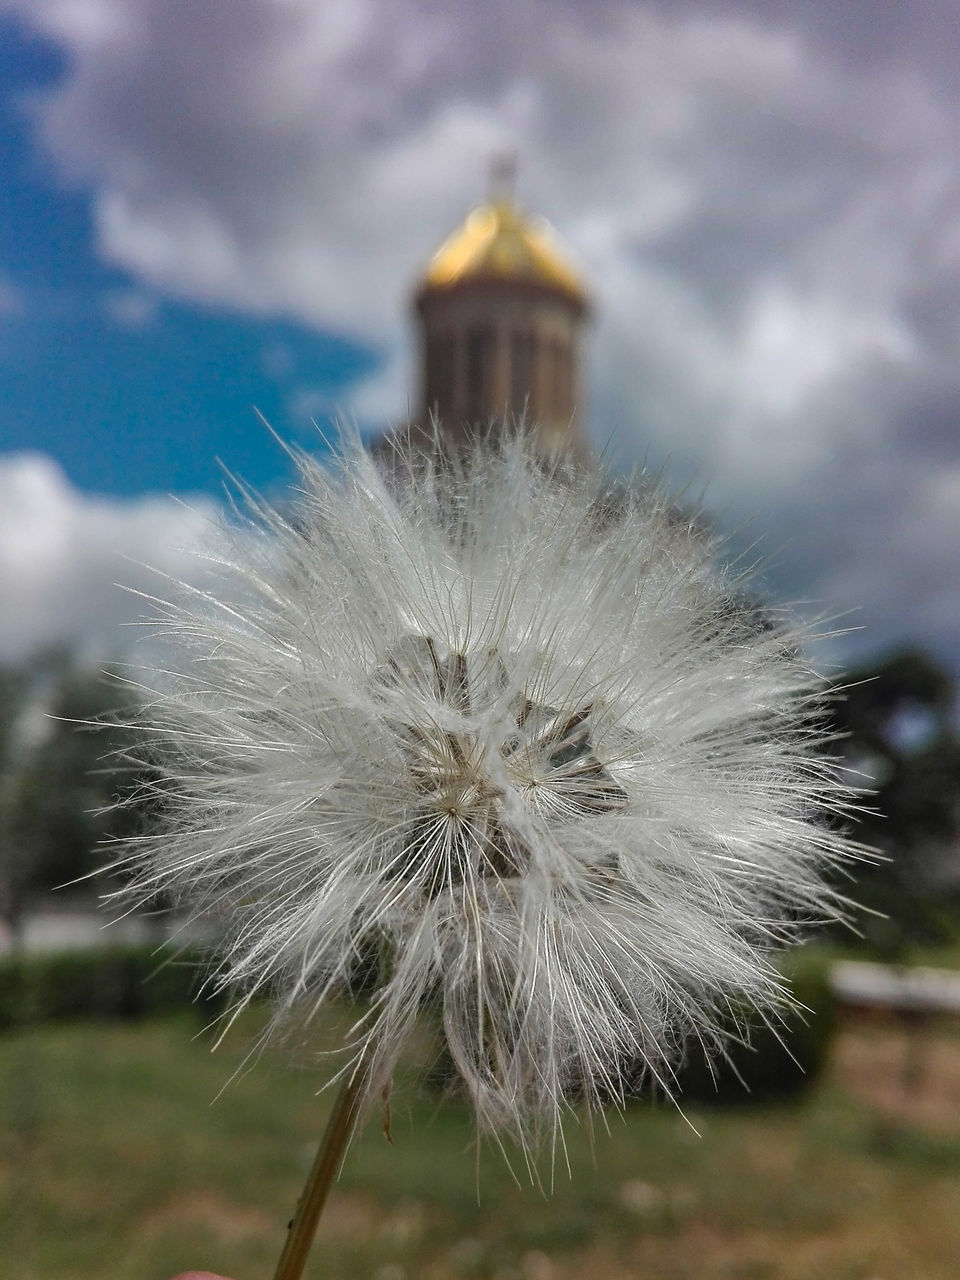 flower, fragility, flowering plant, vulnerability, plant, dandelion, close-up, beauty in nature, inflorescence, focus on foreground, flower head, nature, softness, freshness, growth, no people, day, white color, dandelion seed, outdoors